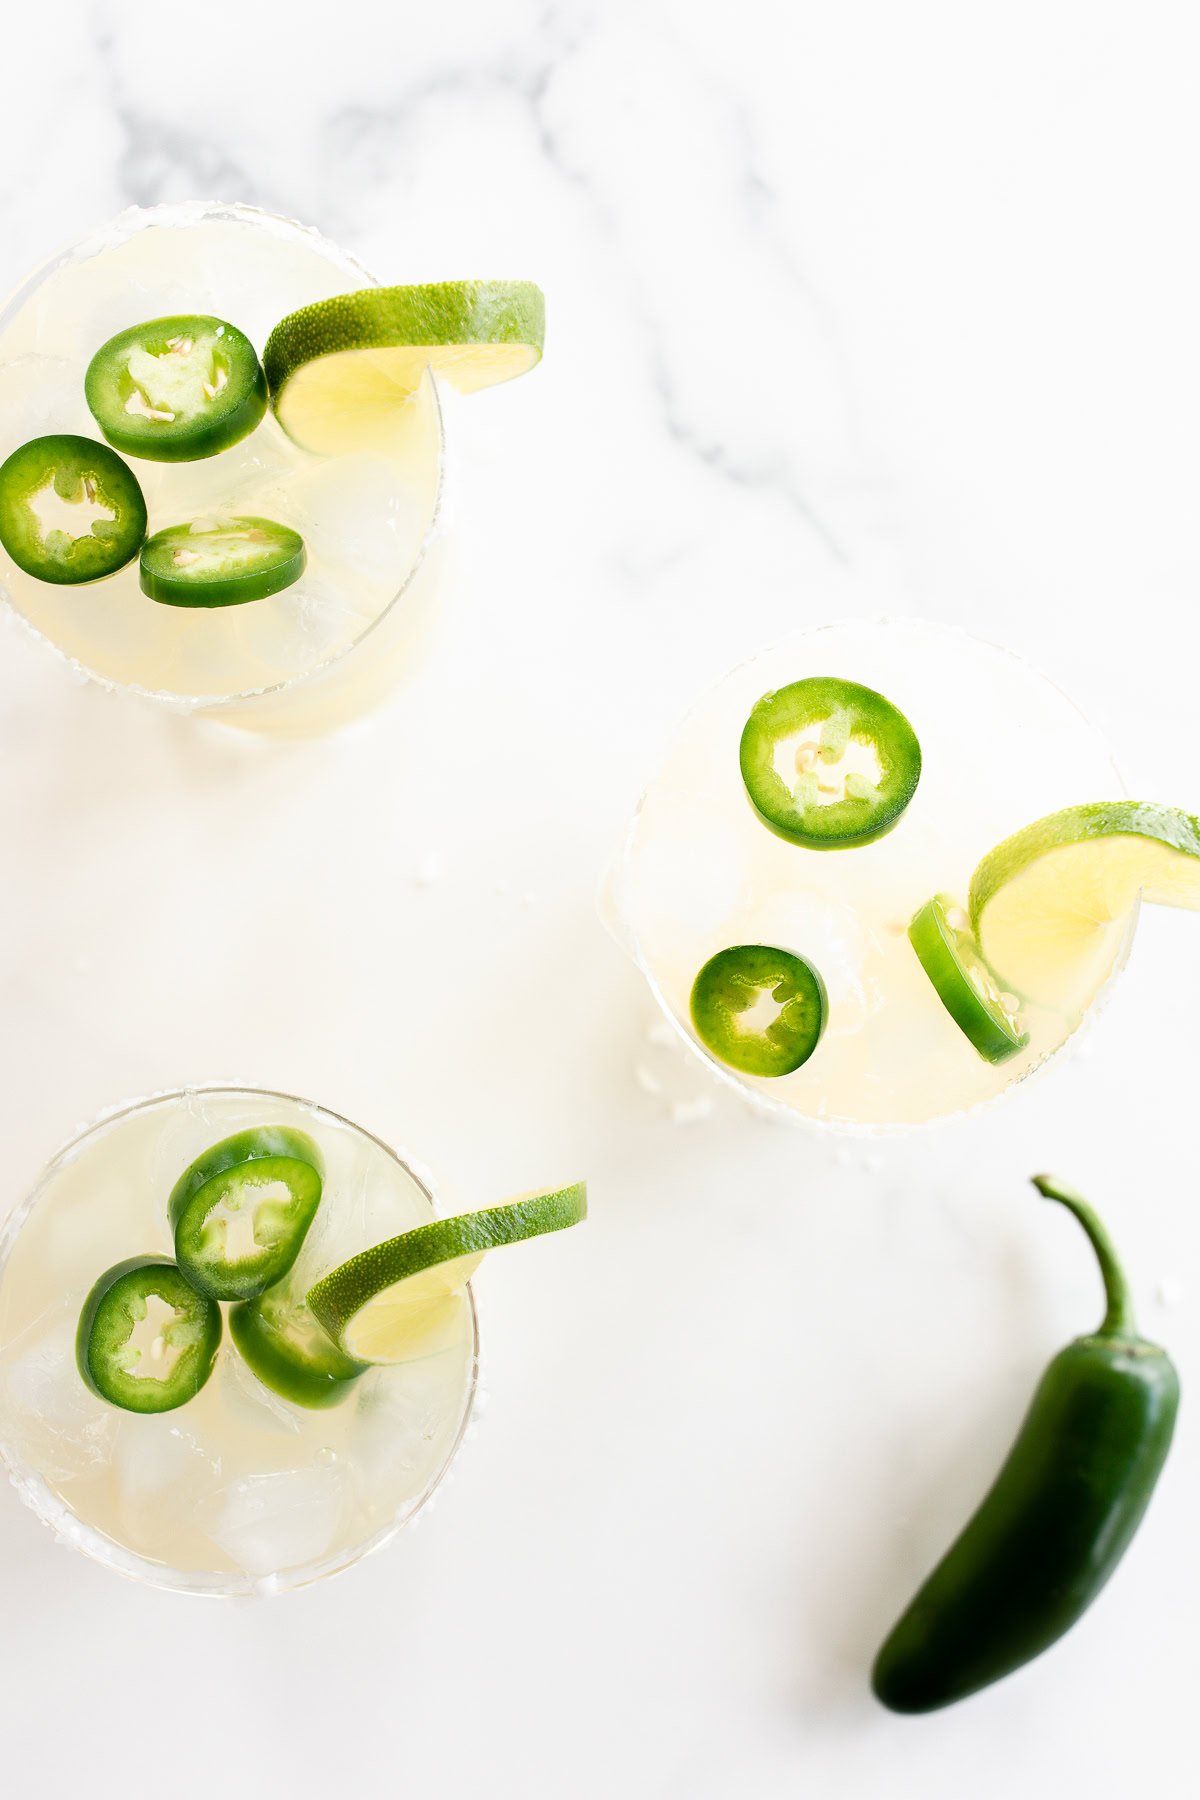 Three Jalapeño Margaritas with jalapeño slices and lime garnishes on a marble surface, with a whole jalapeño pepper beside them.